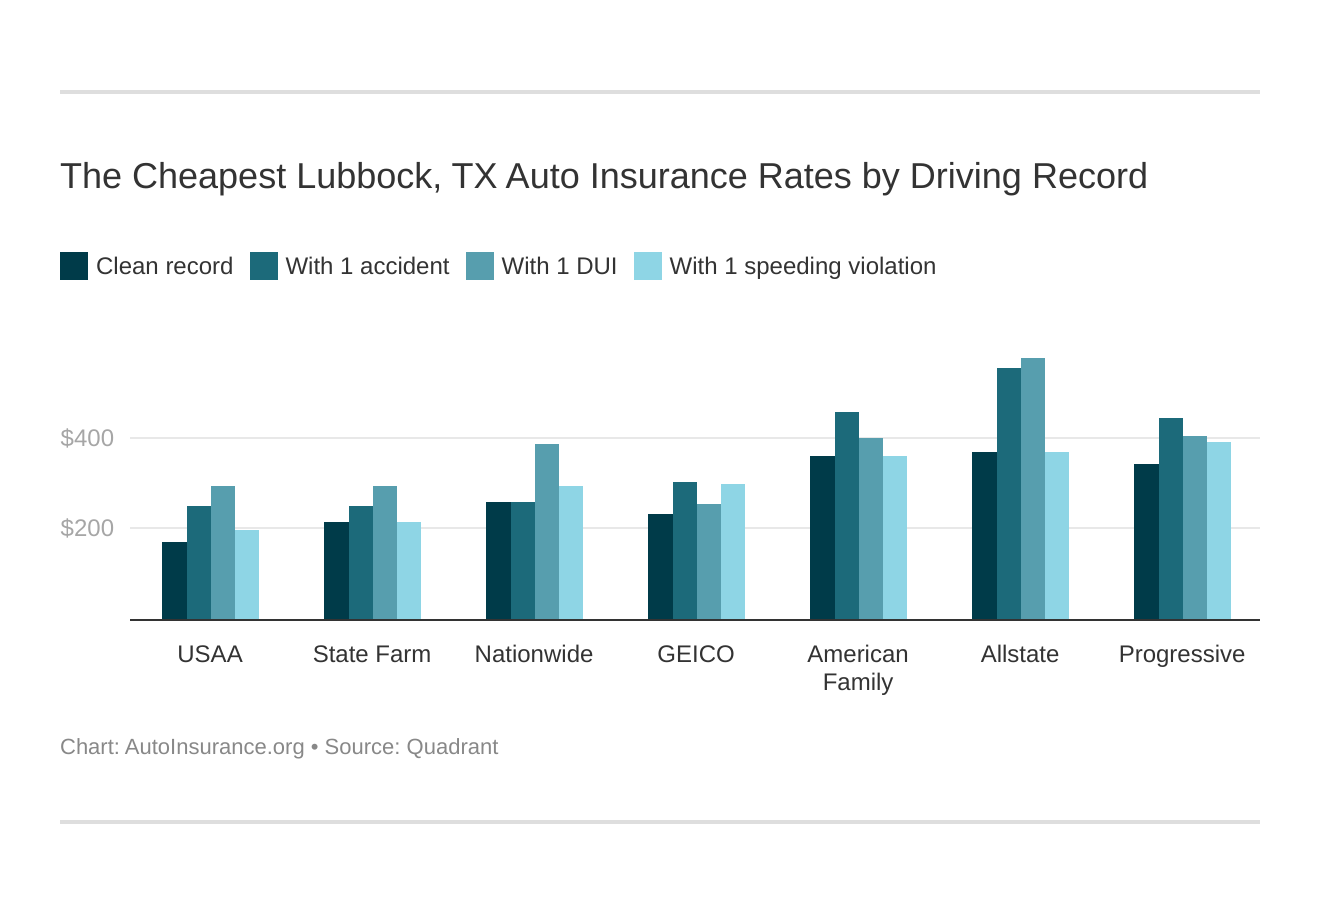 The Cheapest Lubbock, TX Auto Insurance Rates by Driving Record